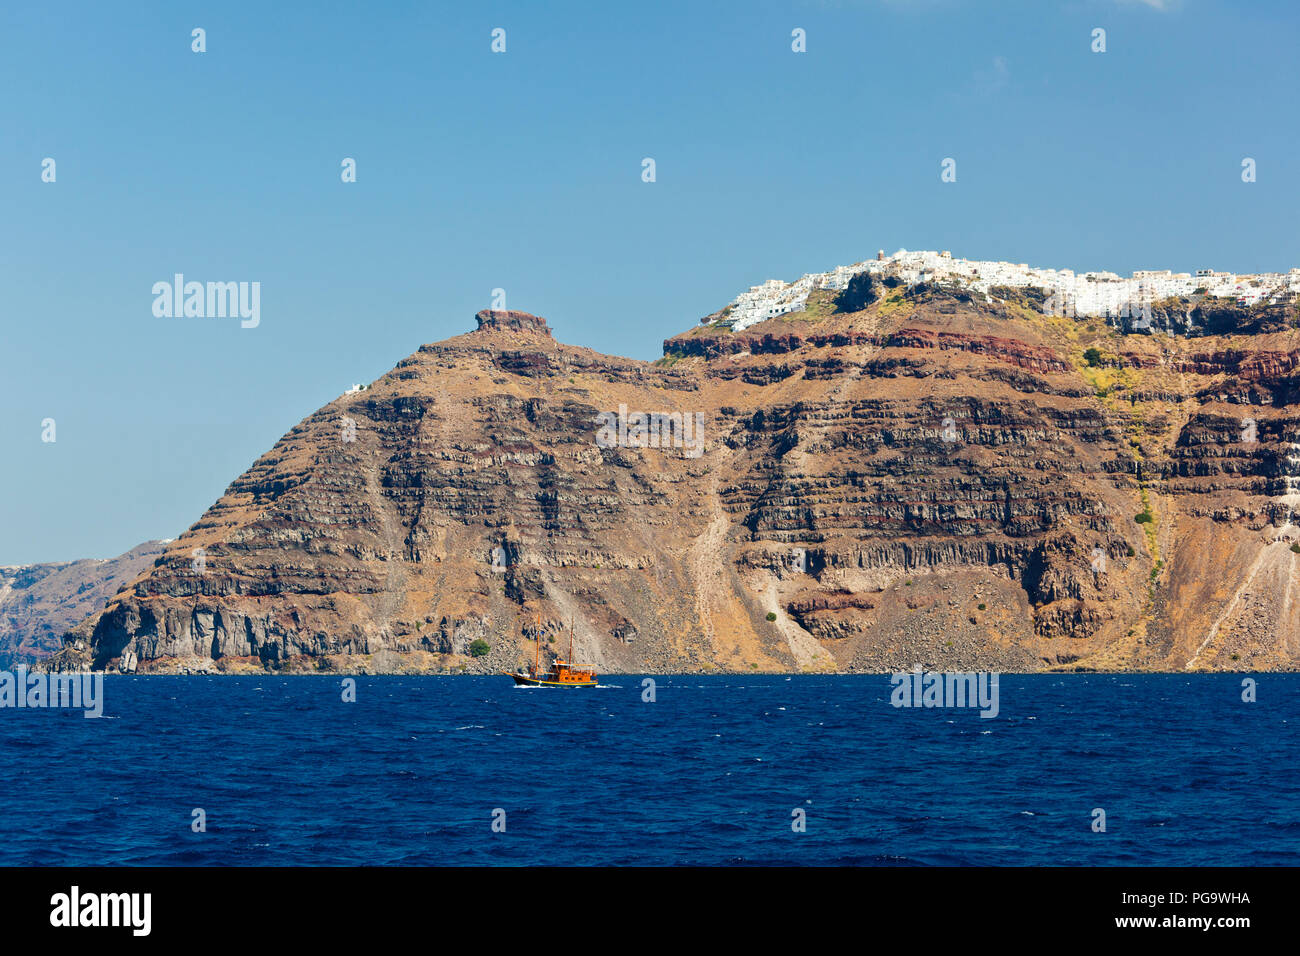 View from a boat to the village of Imerovigli in Santorini, Greece. Stock Photo